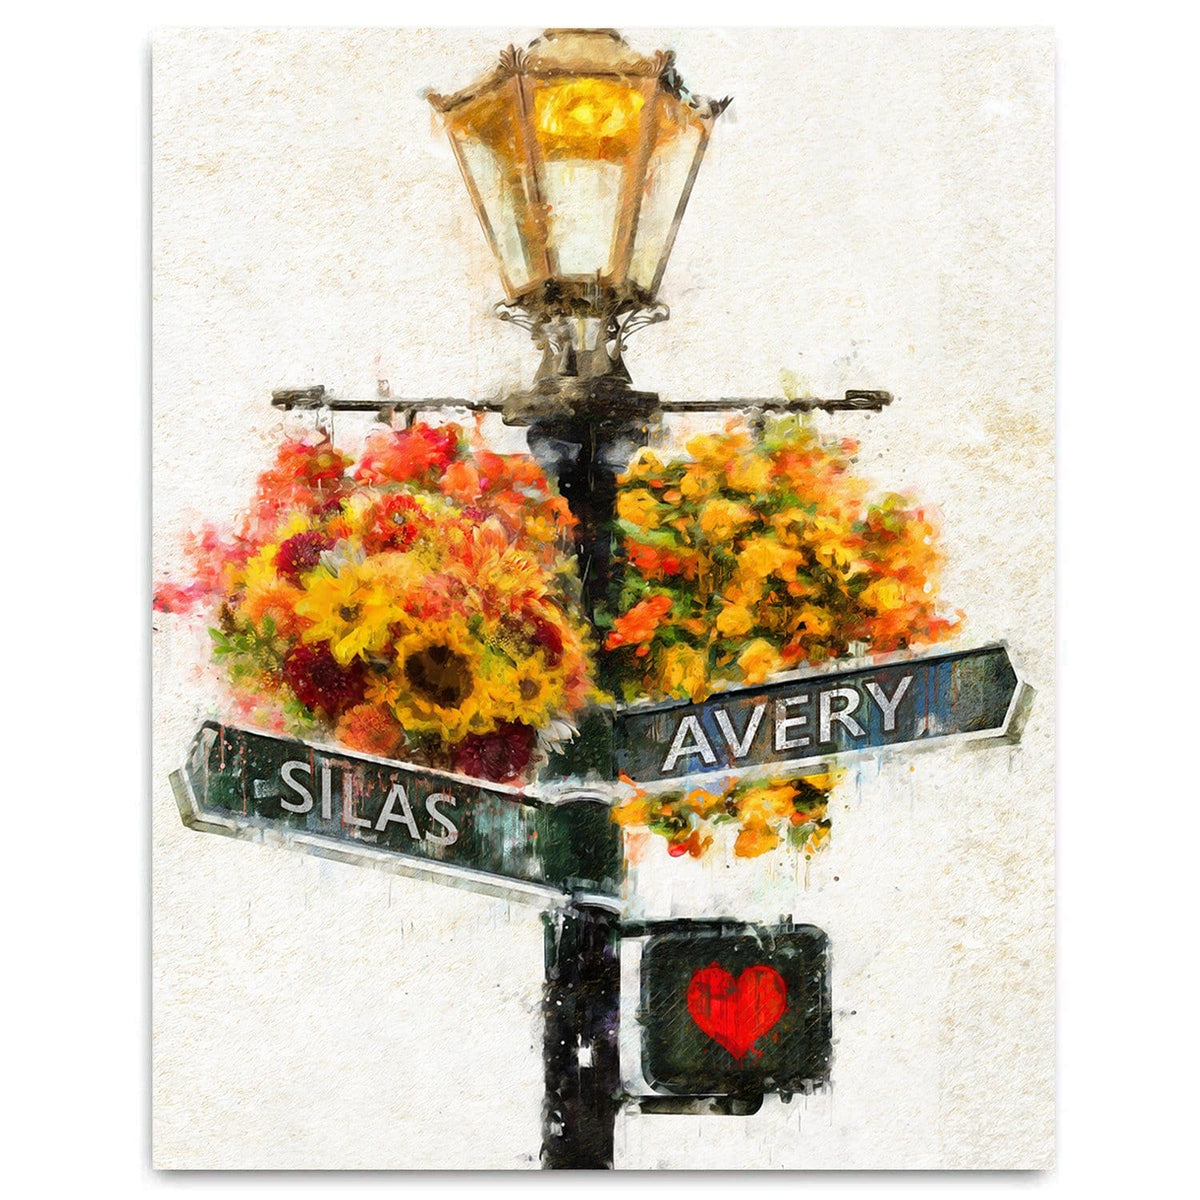 Personalized street sign romantic gift from Personal Prints